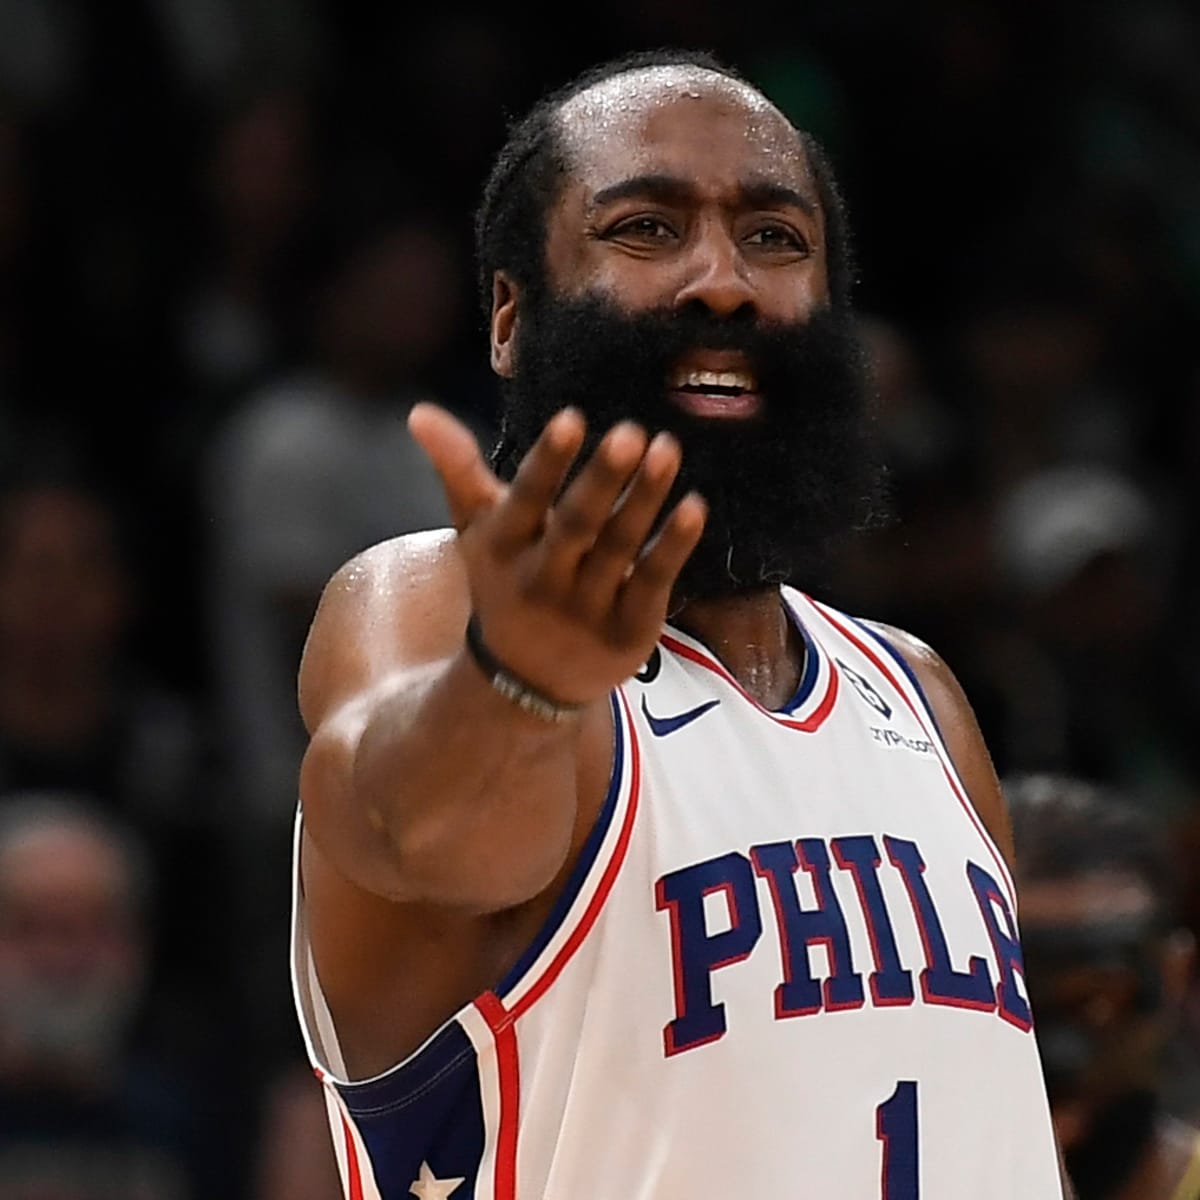 NBA Rumors: James Harden-76ers Feud Takes Turn With League Inquiry